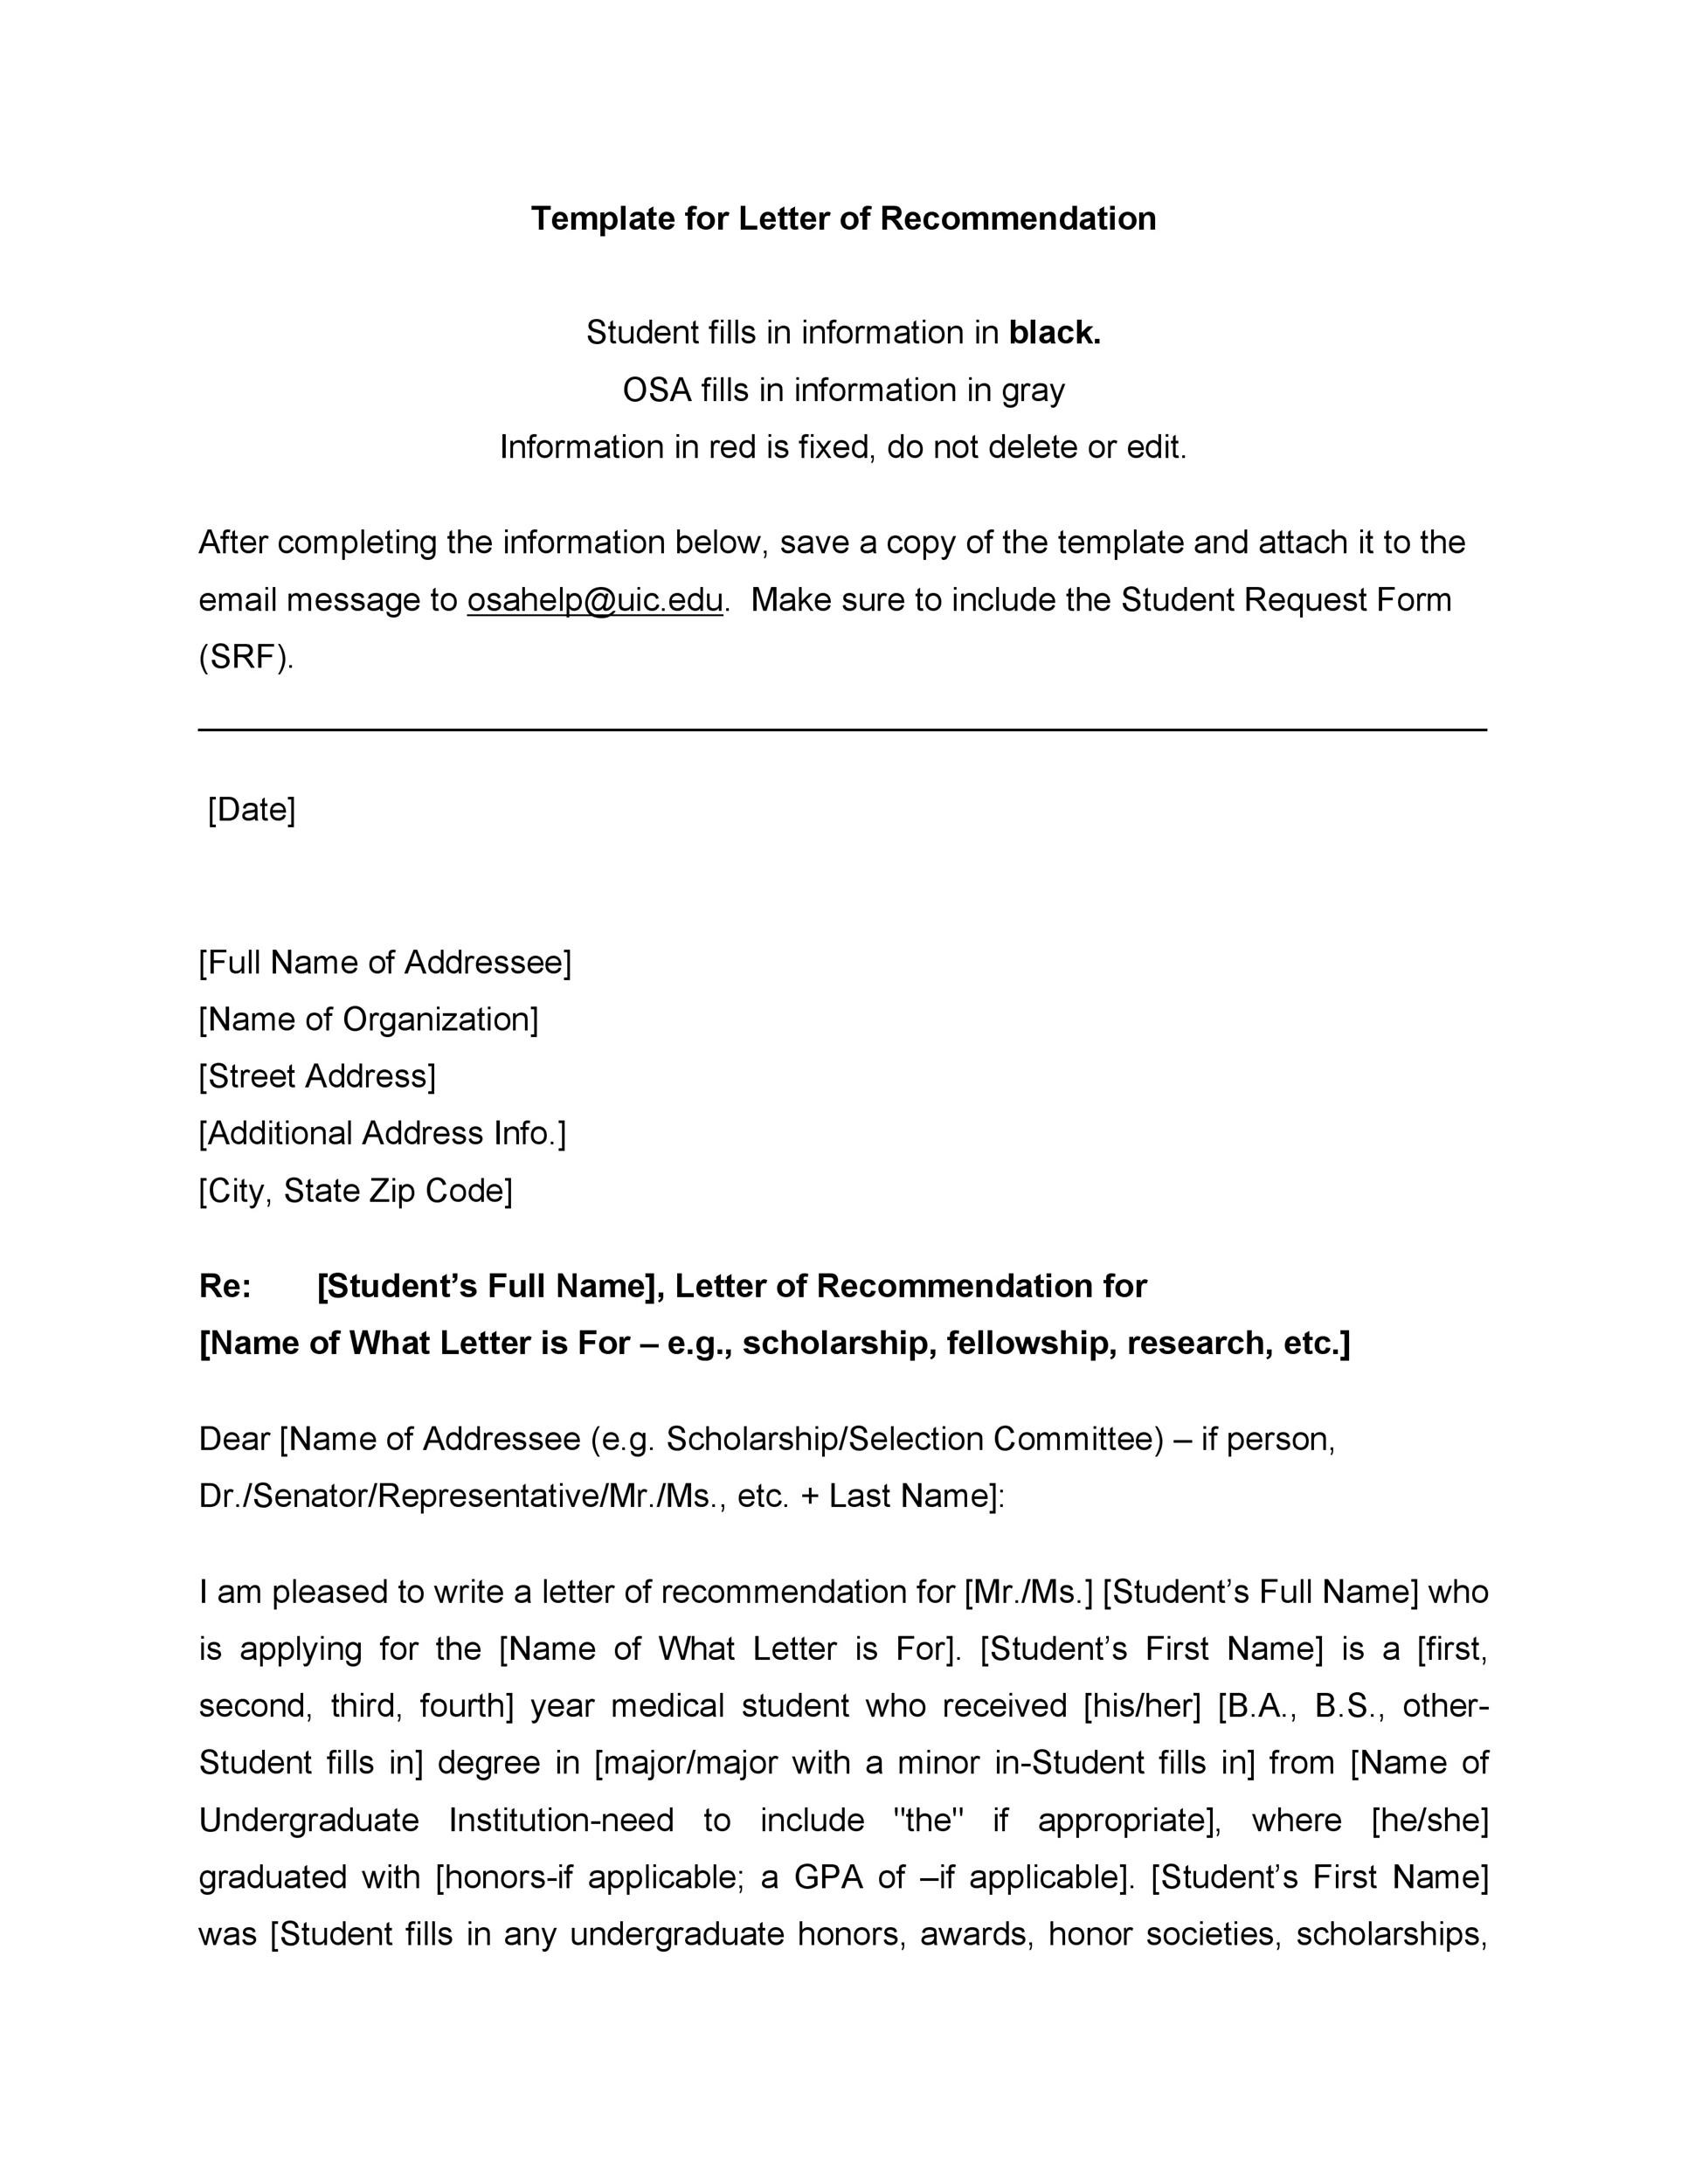 Example Of Letter Of Recommendation For Scholarship from templatelab.com